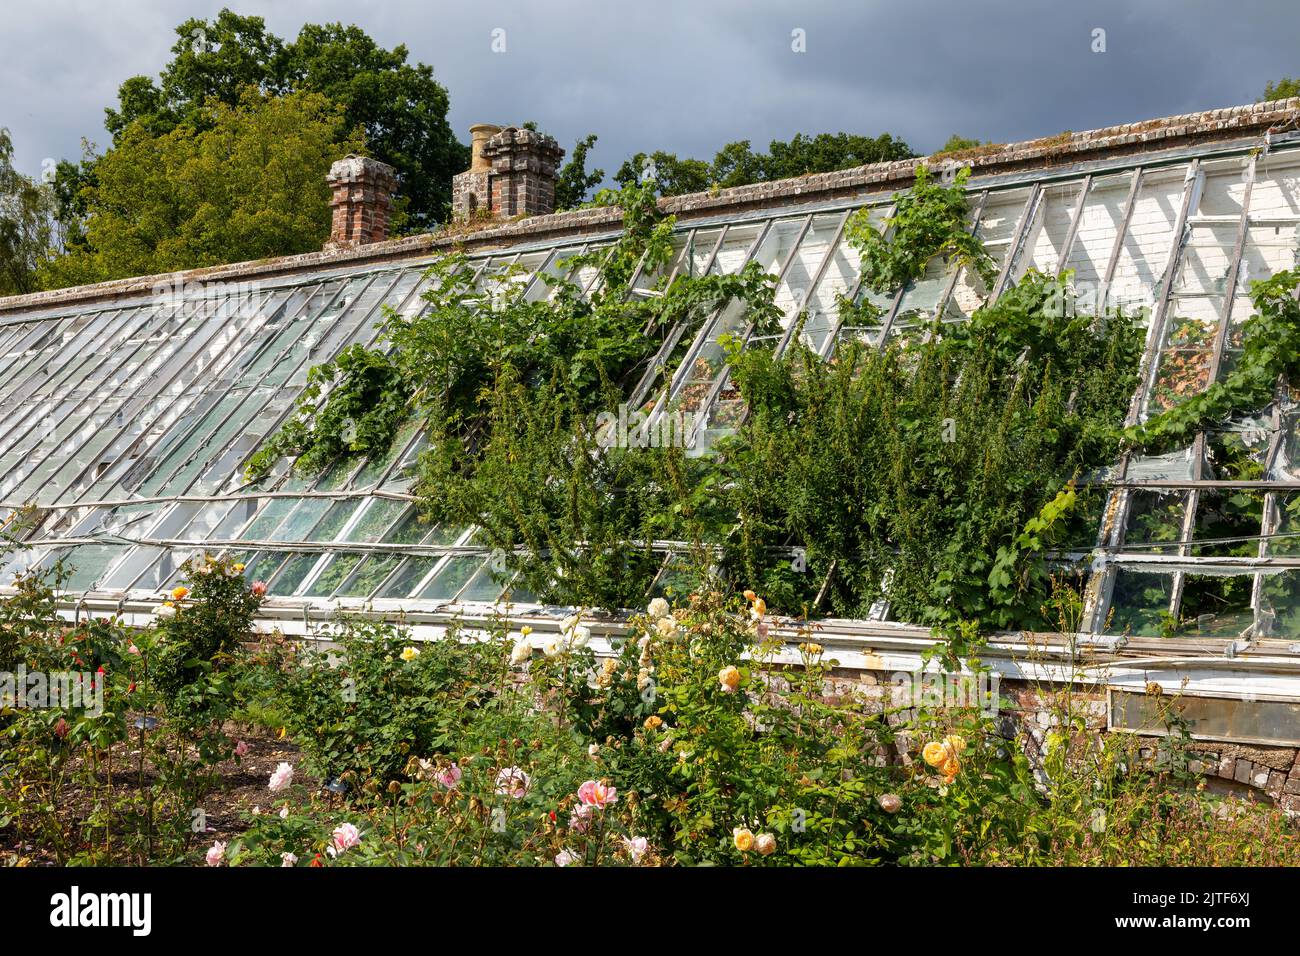 Am overgrown greenhouse in the walled garden at Scotney Castle and gardens, Kent. Managed by the National Trust Stock Photo